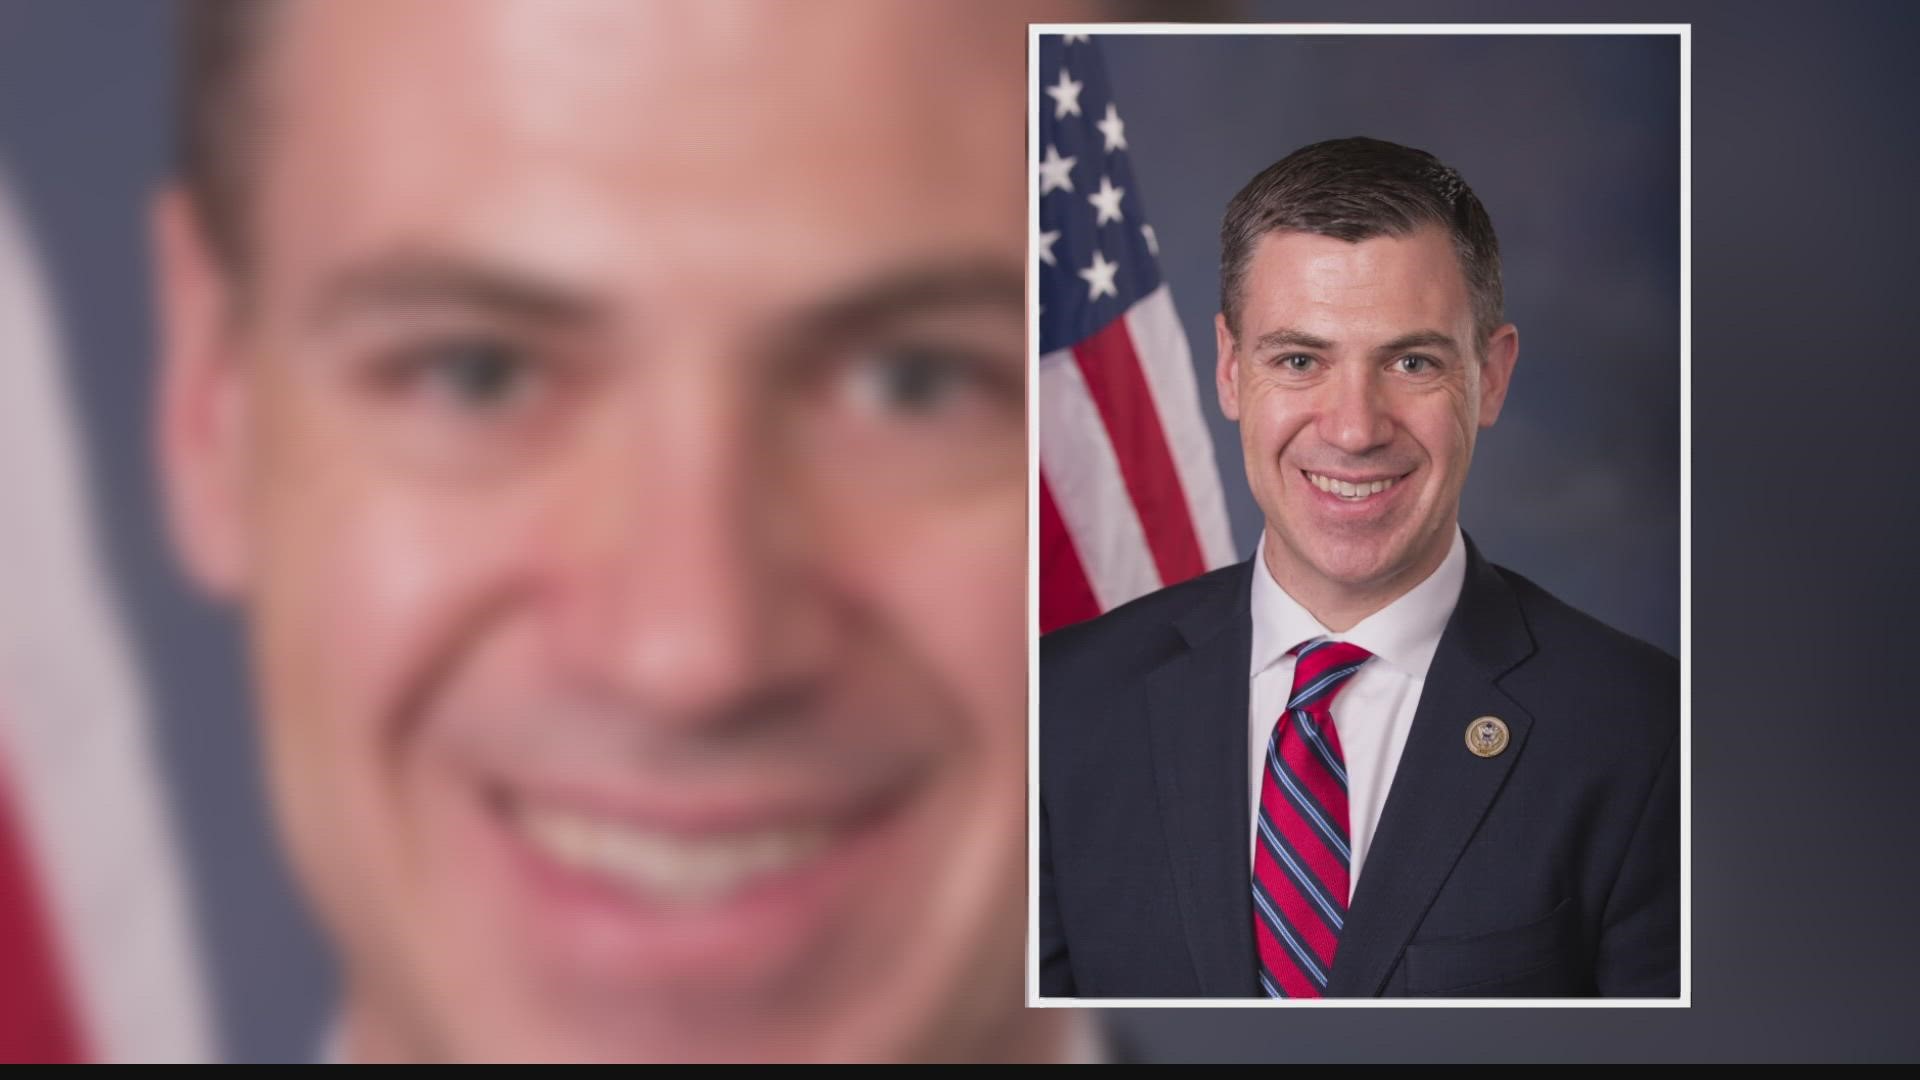 Twitter said Rep. Jim Banks violated its hateful conduct policy with a post about Assistant U.S. Health Secretary Dr. Rachel Levine, who is transgender.